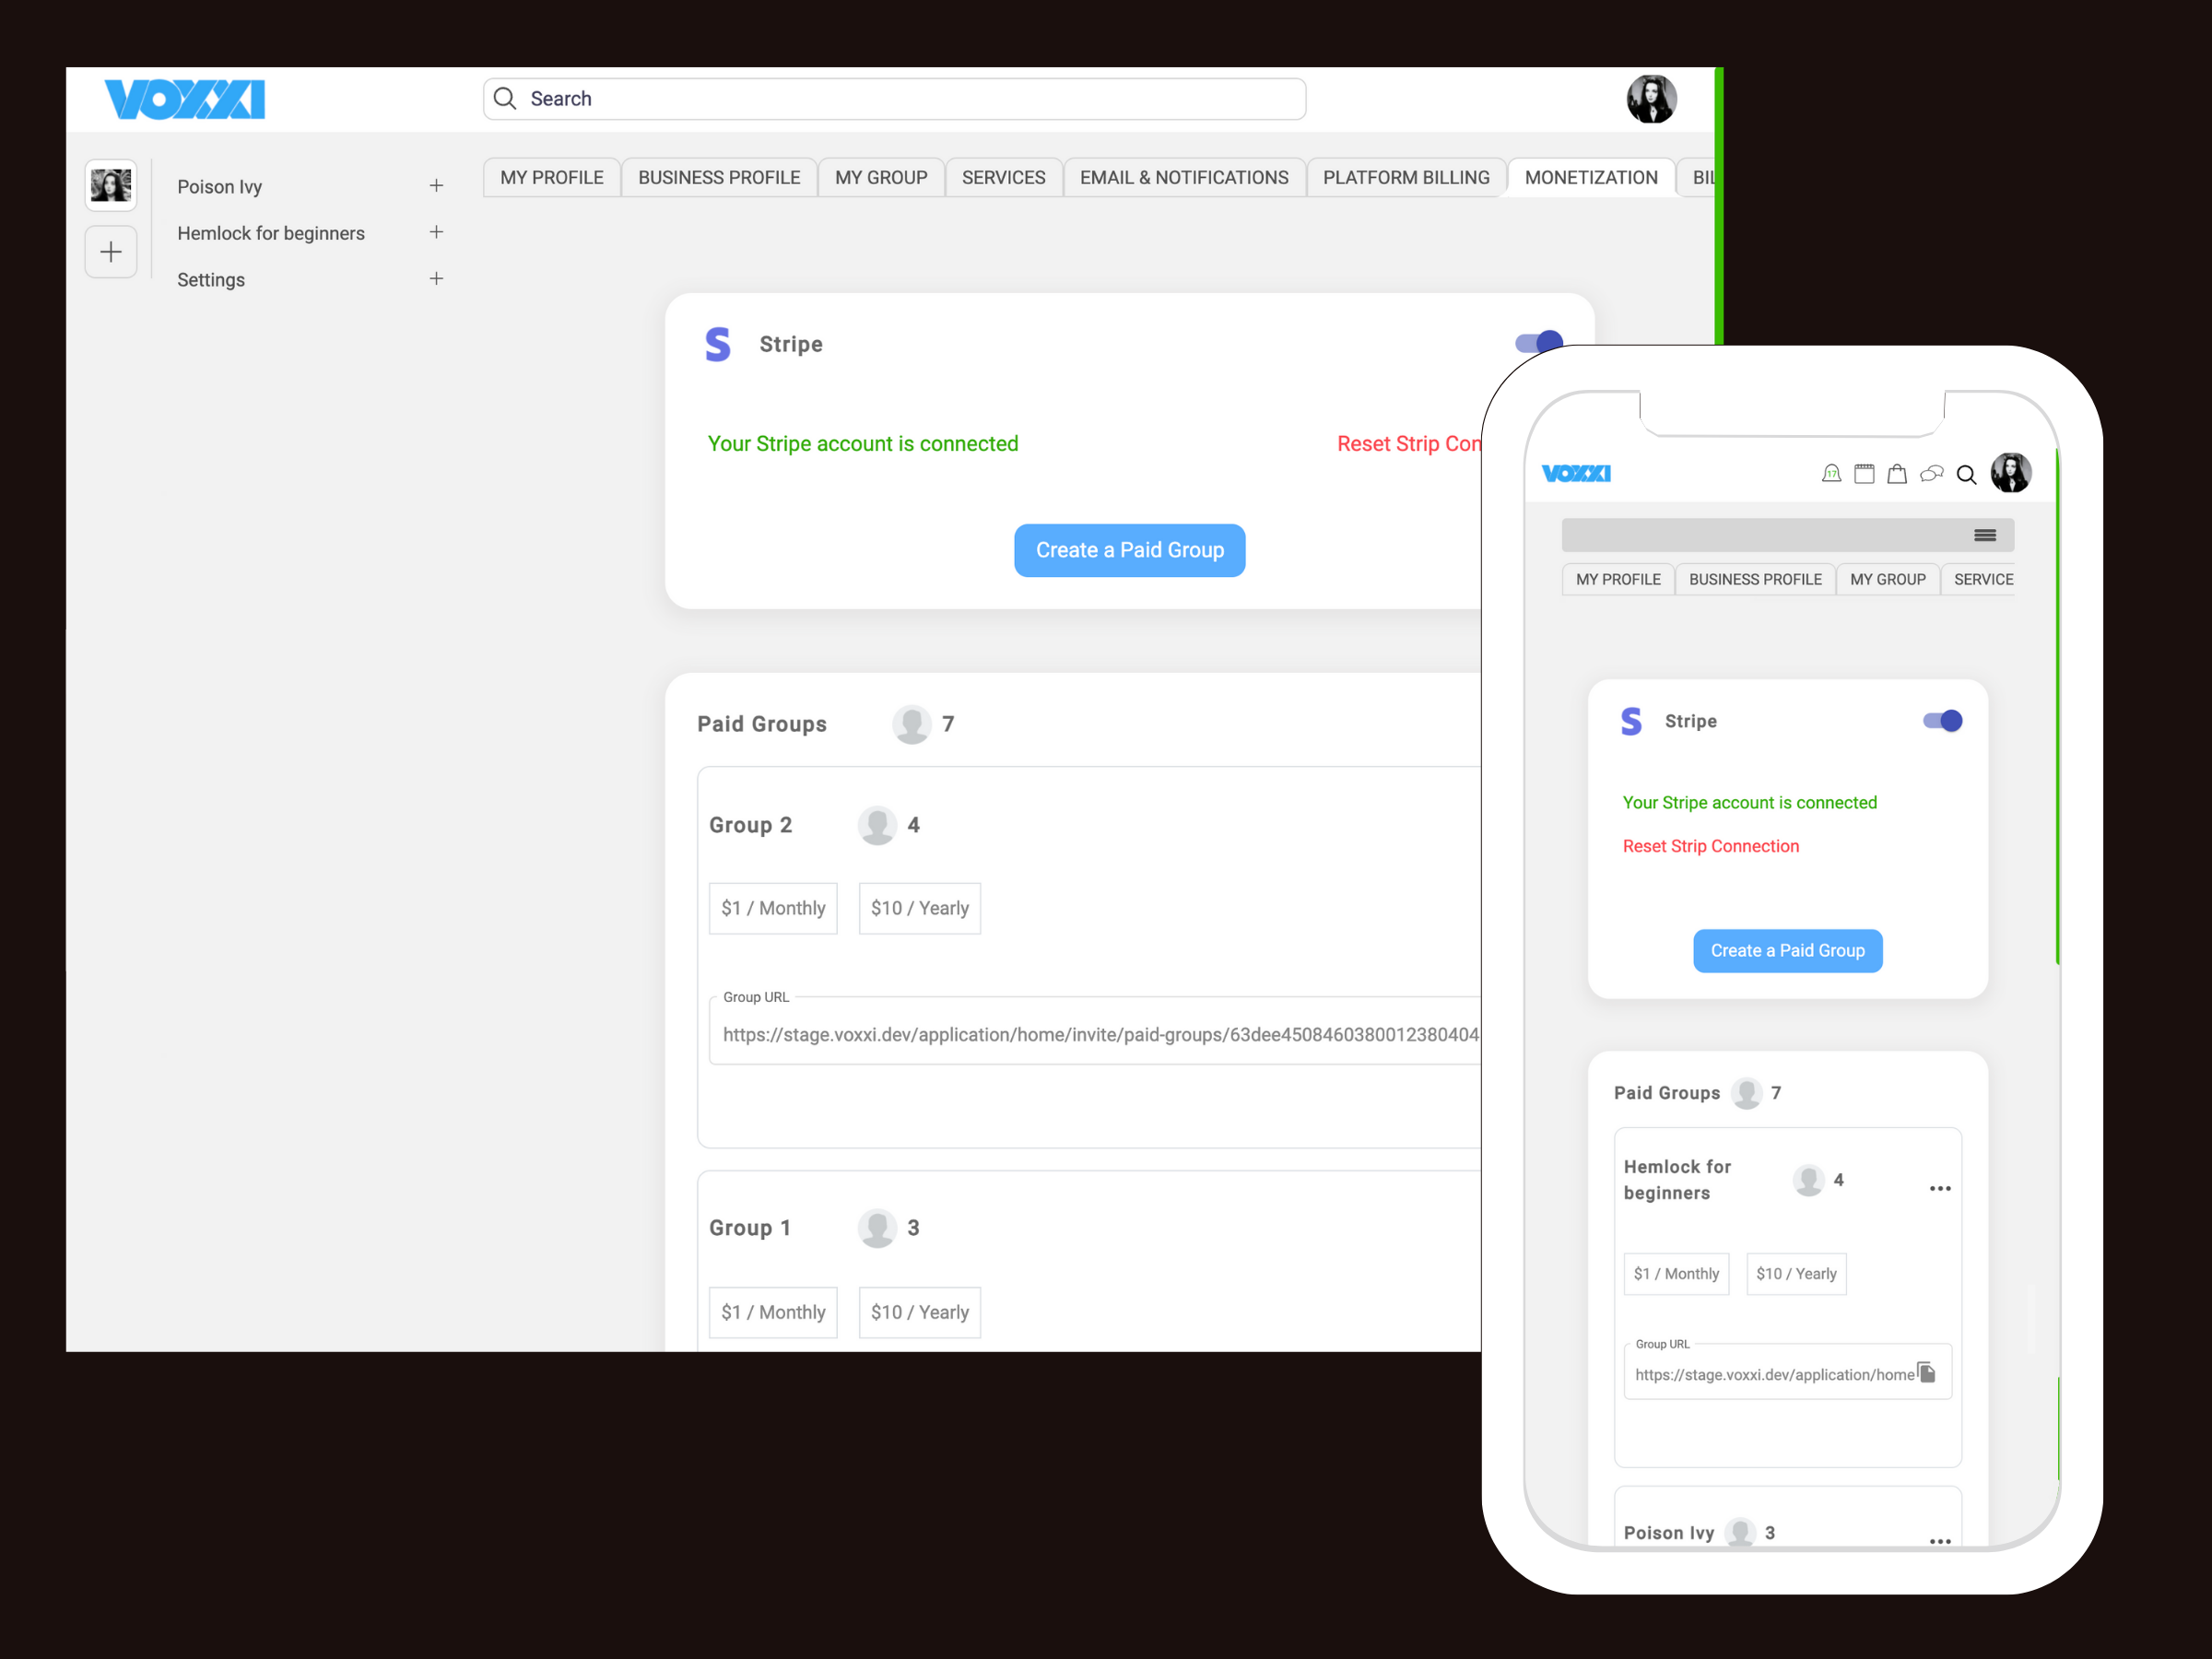 Connect to Stripe and create groups and you can build paid communities